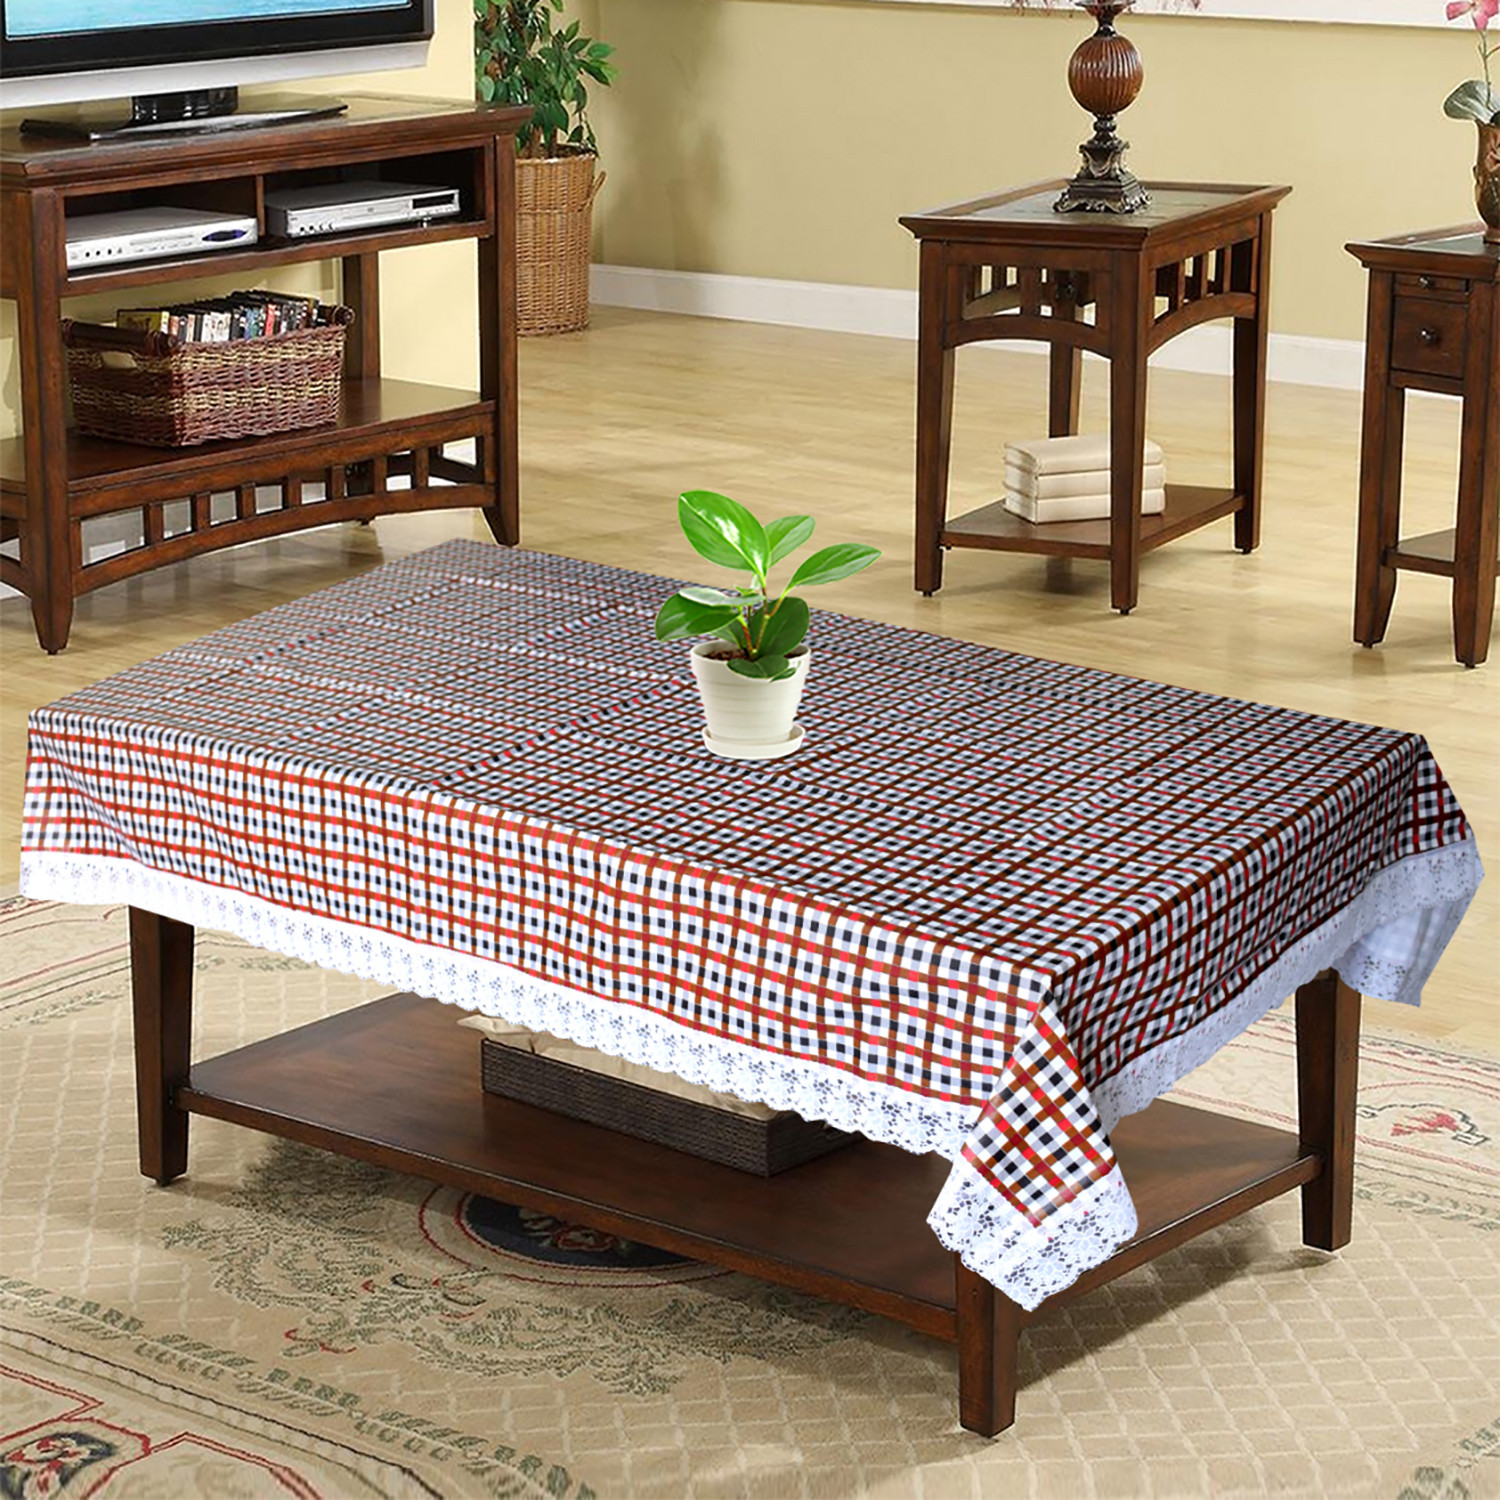 Kuber Industries Check Printed PVC 4 Seater Center Table Cover, Protector With White Lace Border, 40